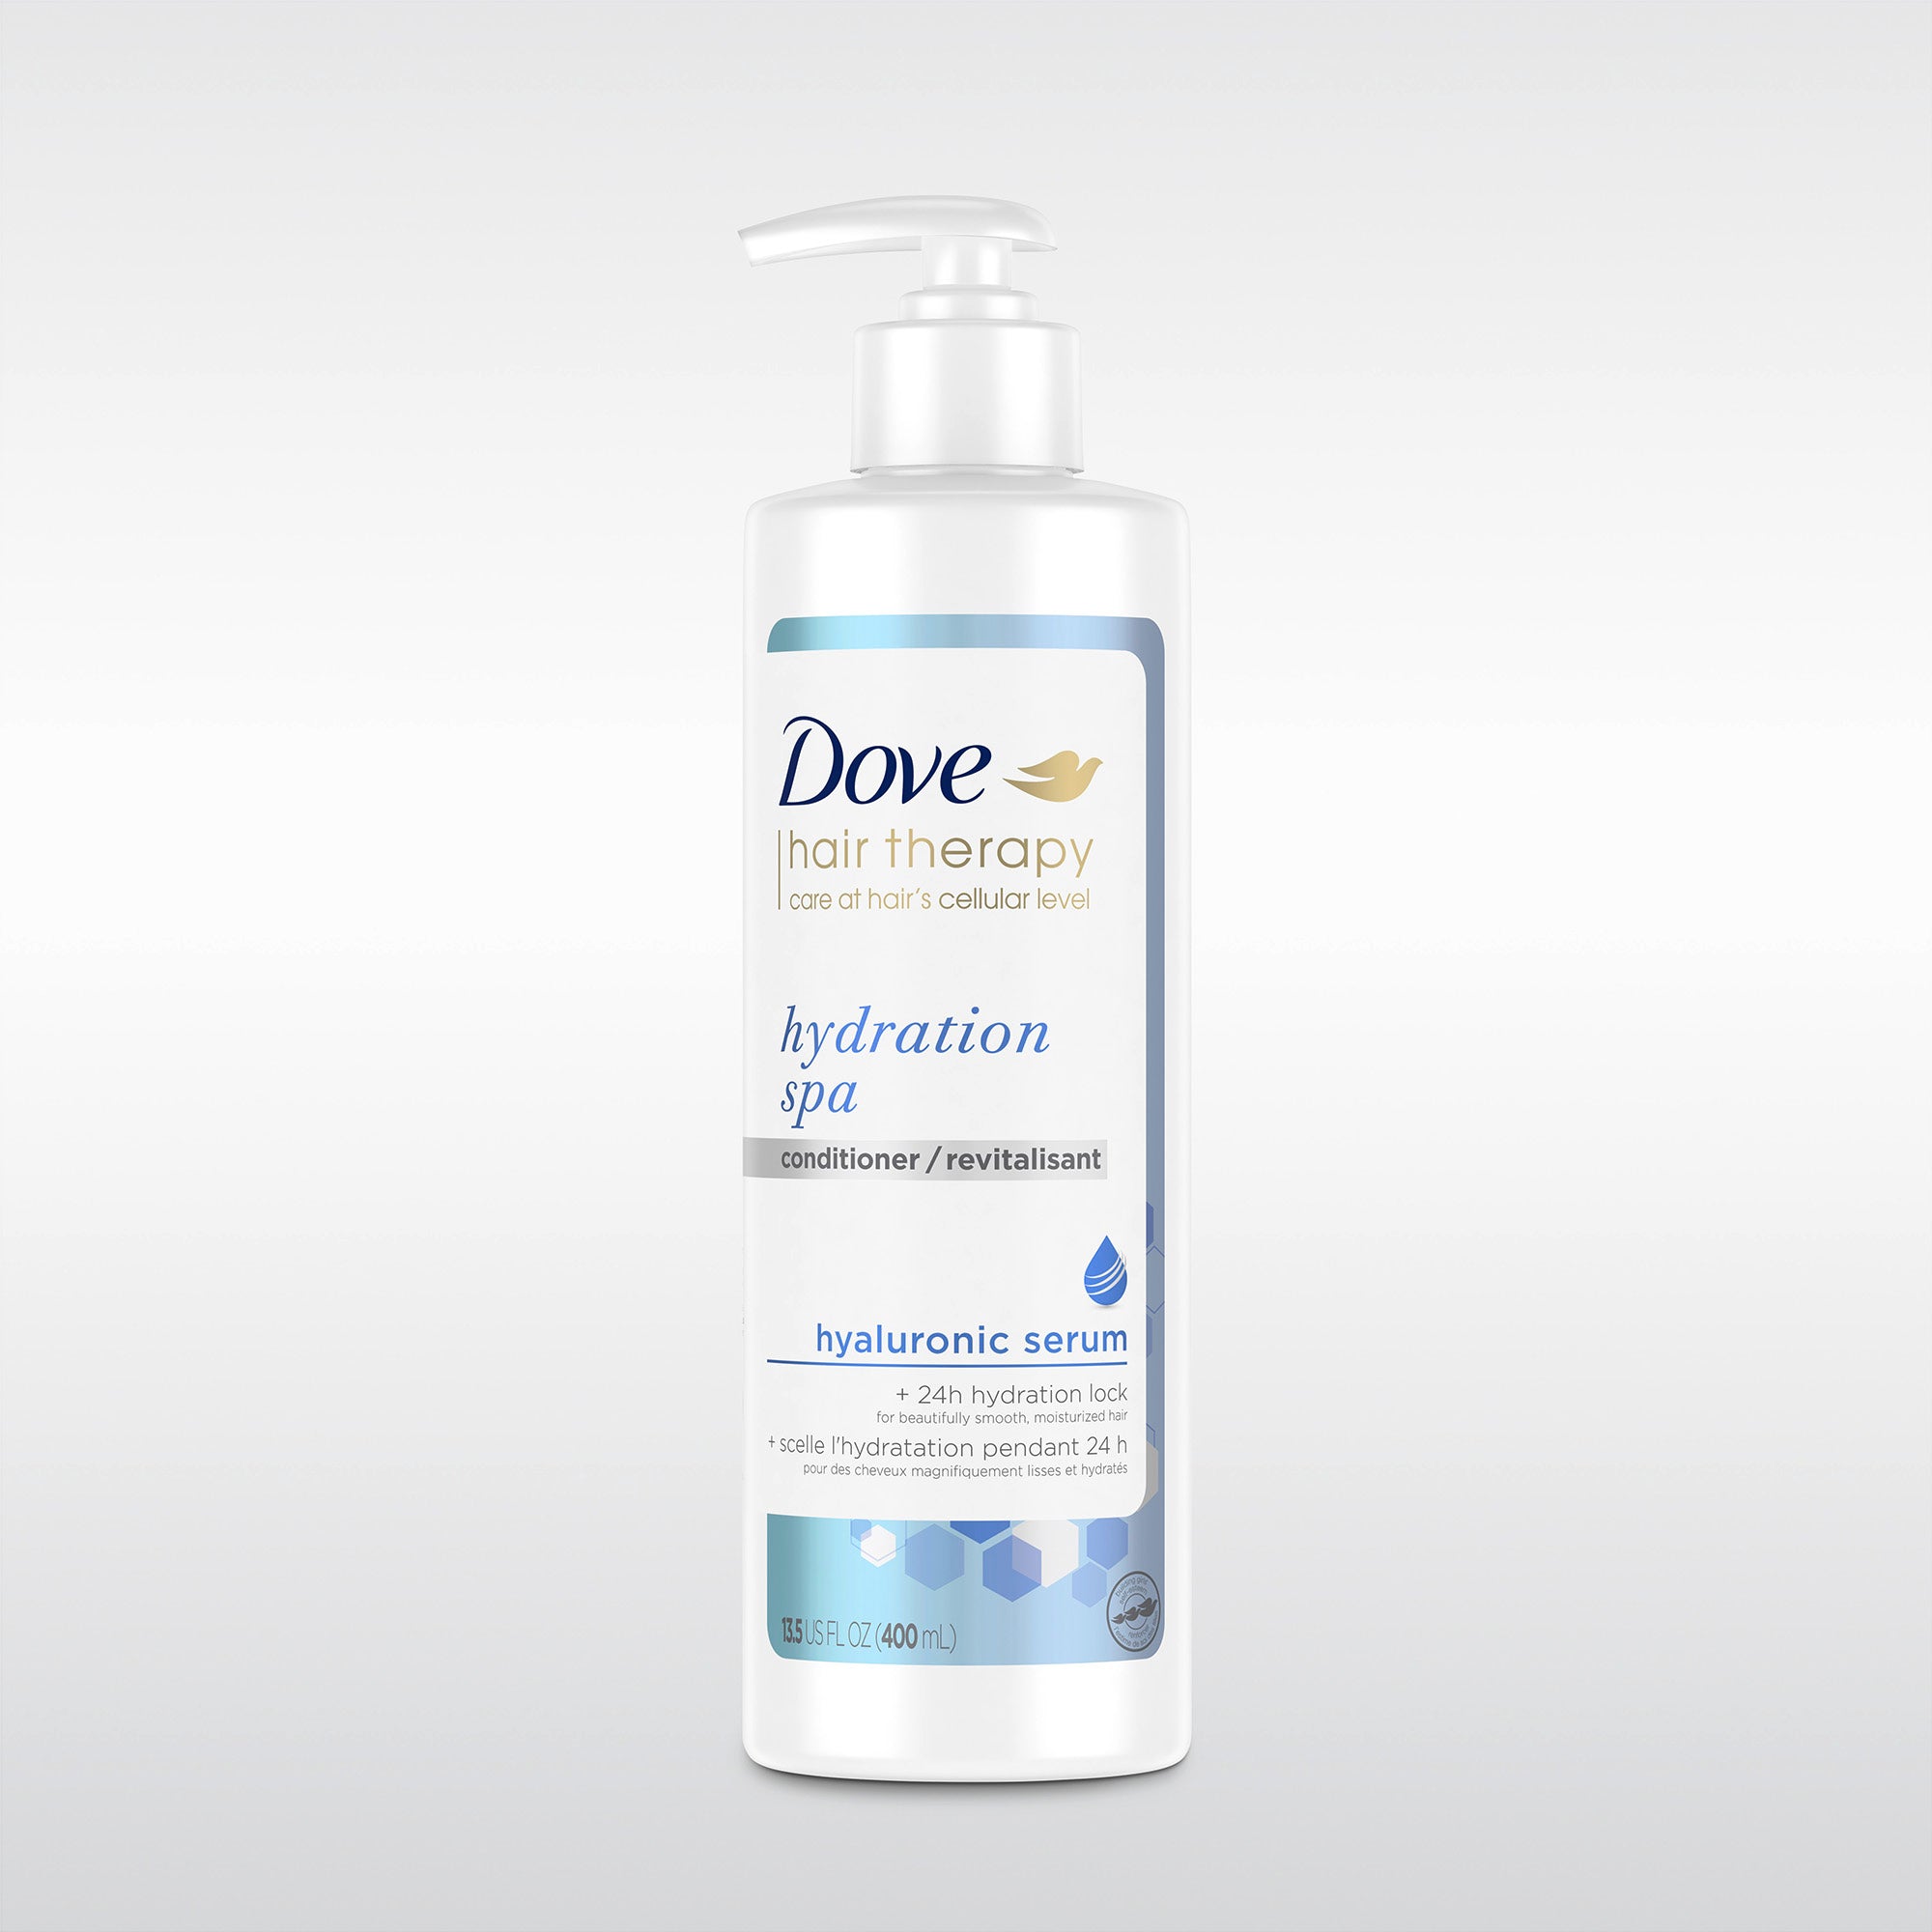 Dove hair therapy hydration spa conditioner